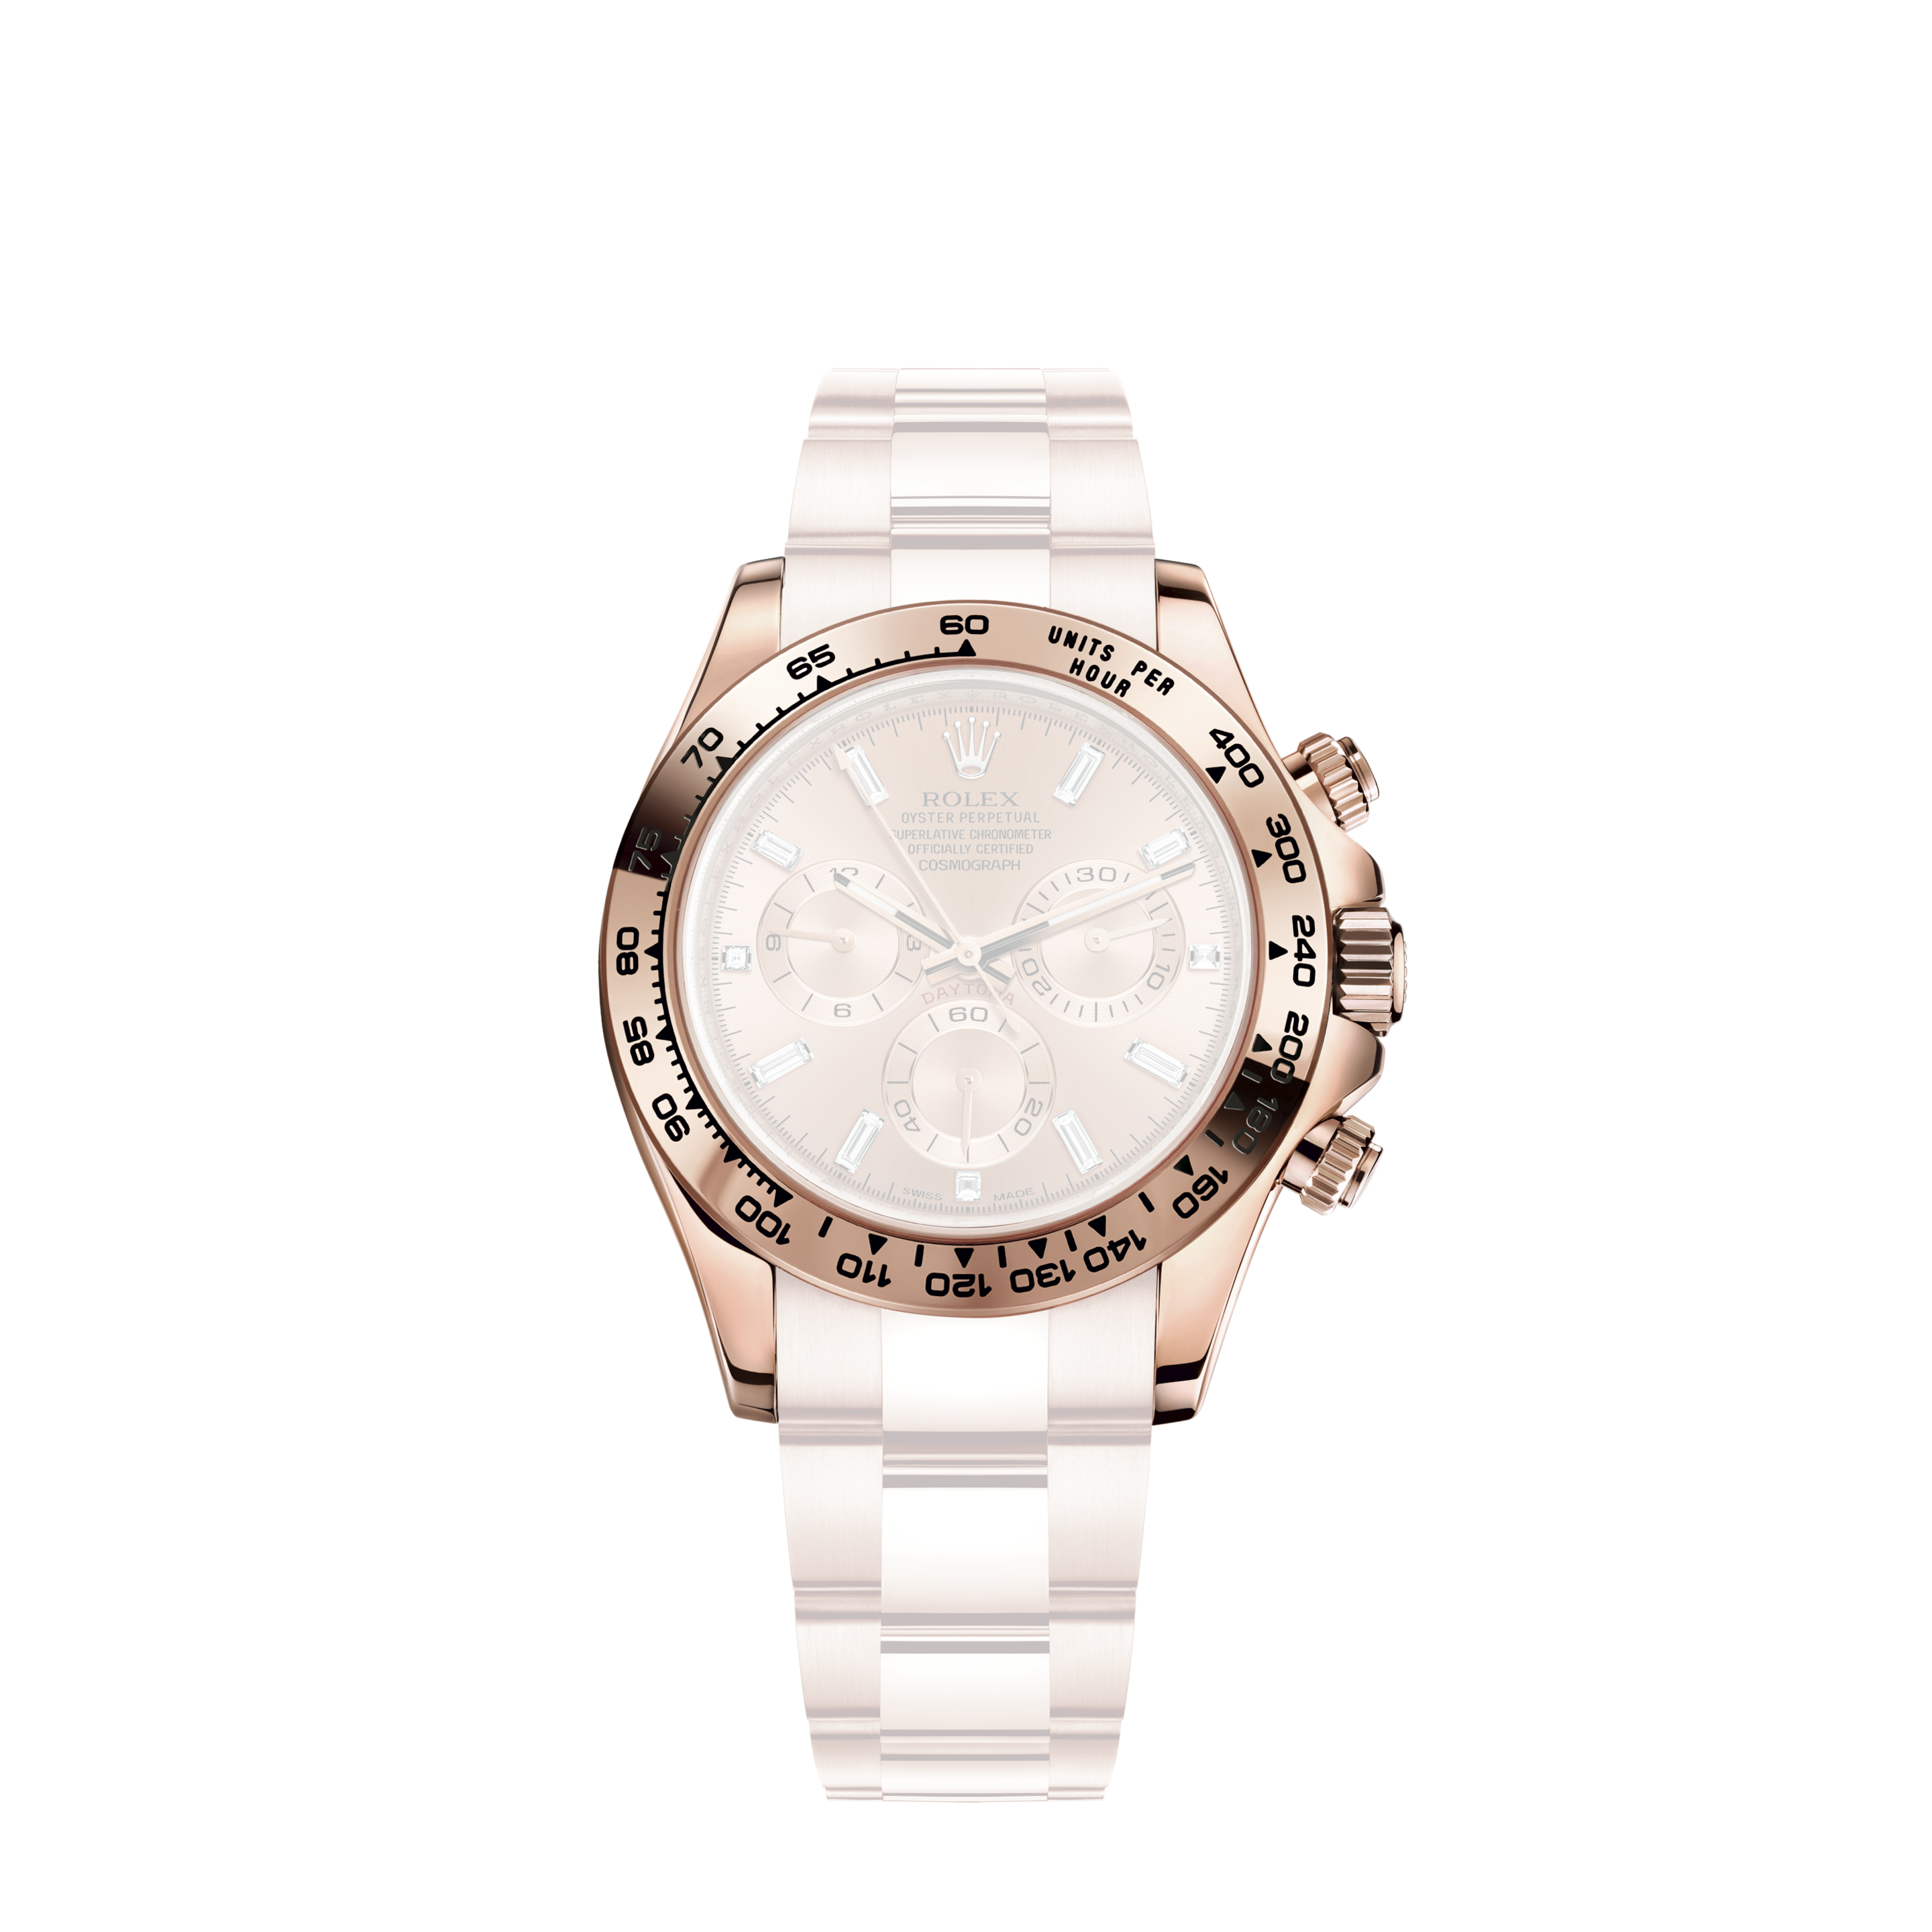 Rolex Lady-Datejust 26mm, 18k Yellow Gold and Stainless Steel, Champagne Dial, 79173